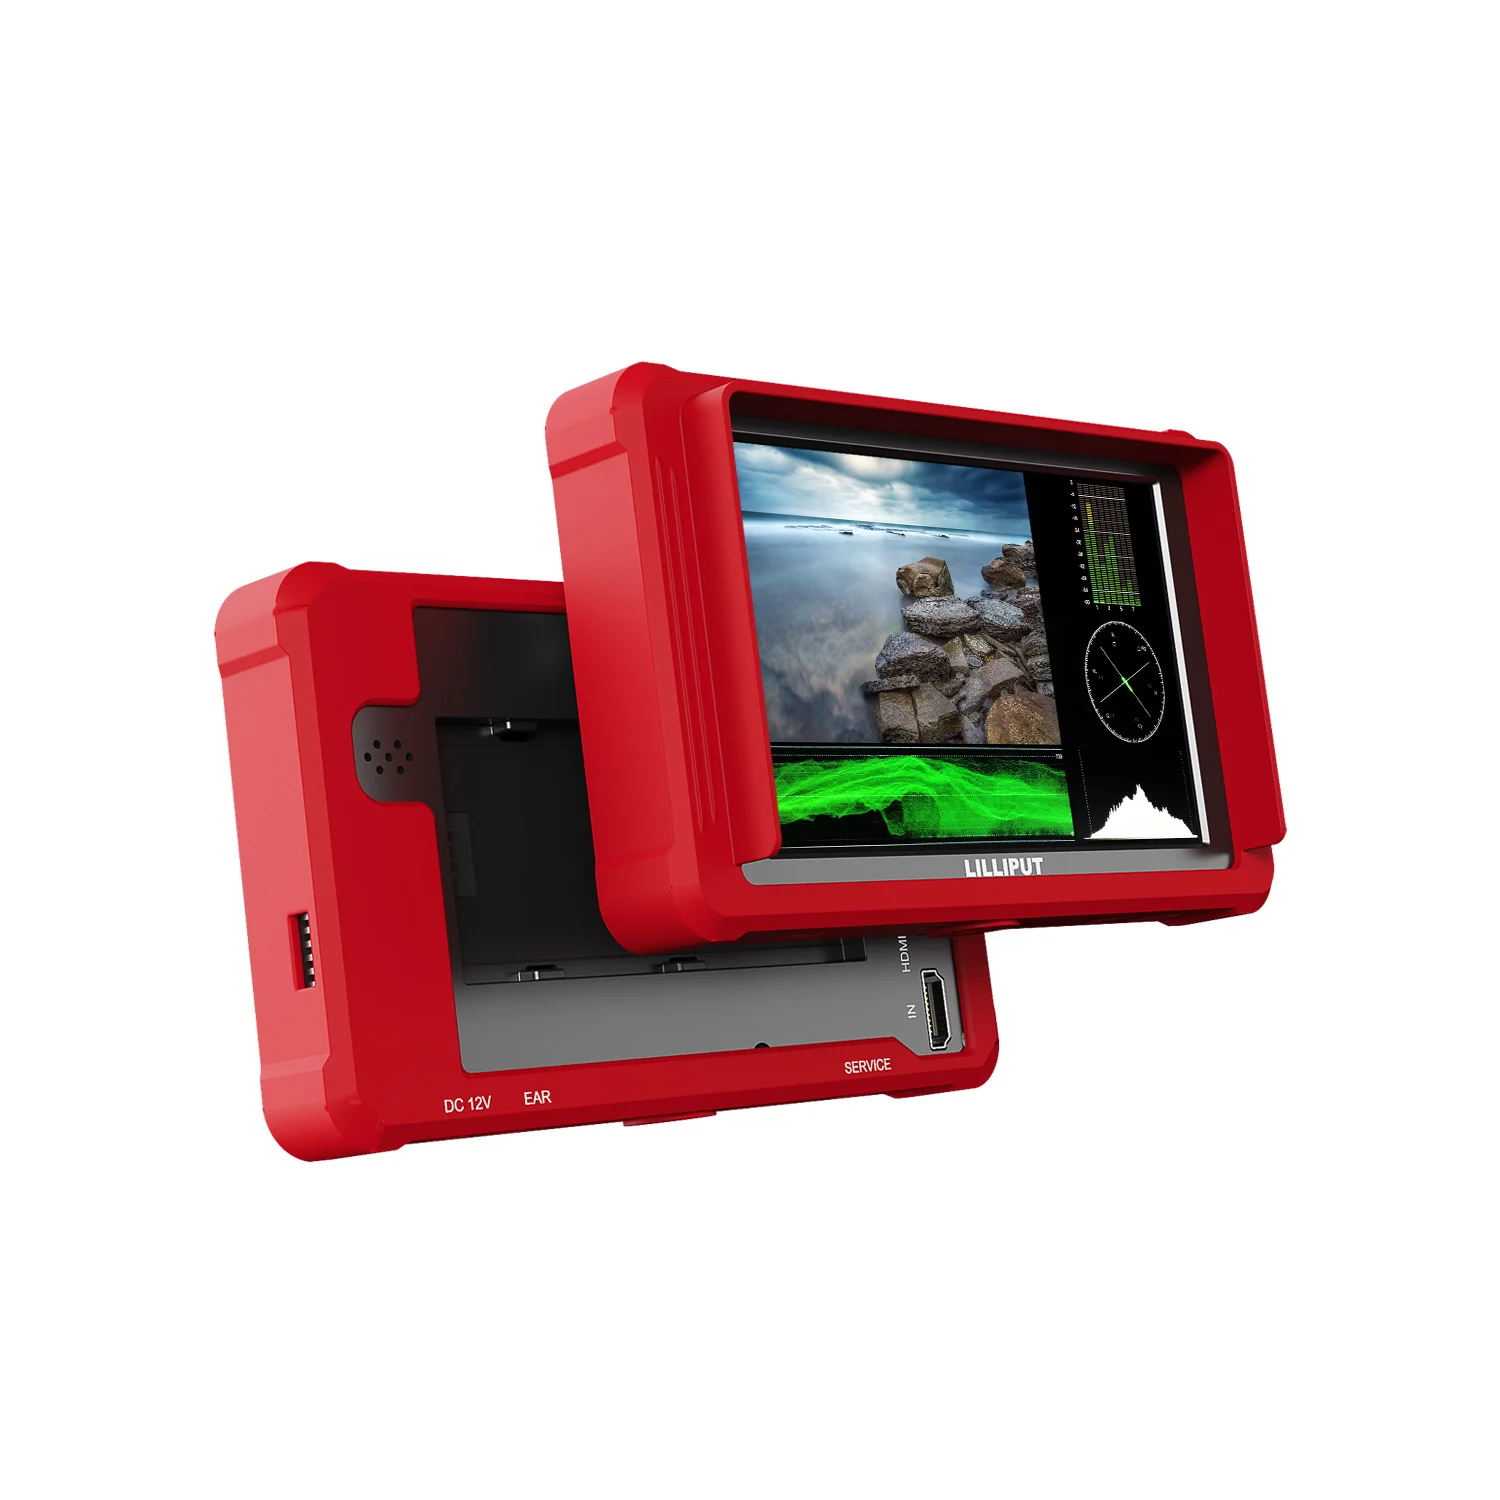 LILLIPUT 5.4 inch HDMI 2.0 3G SDI on camera monitor for camcorder&DSLR Application for taking photos& making movies (1600426750080)